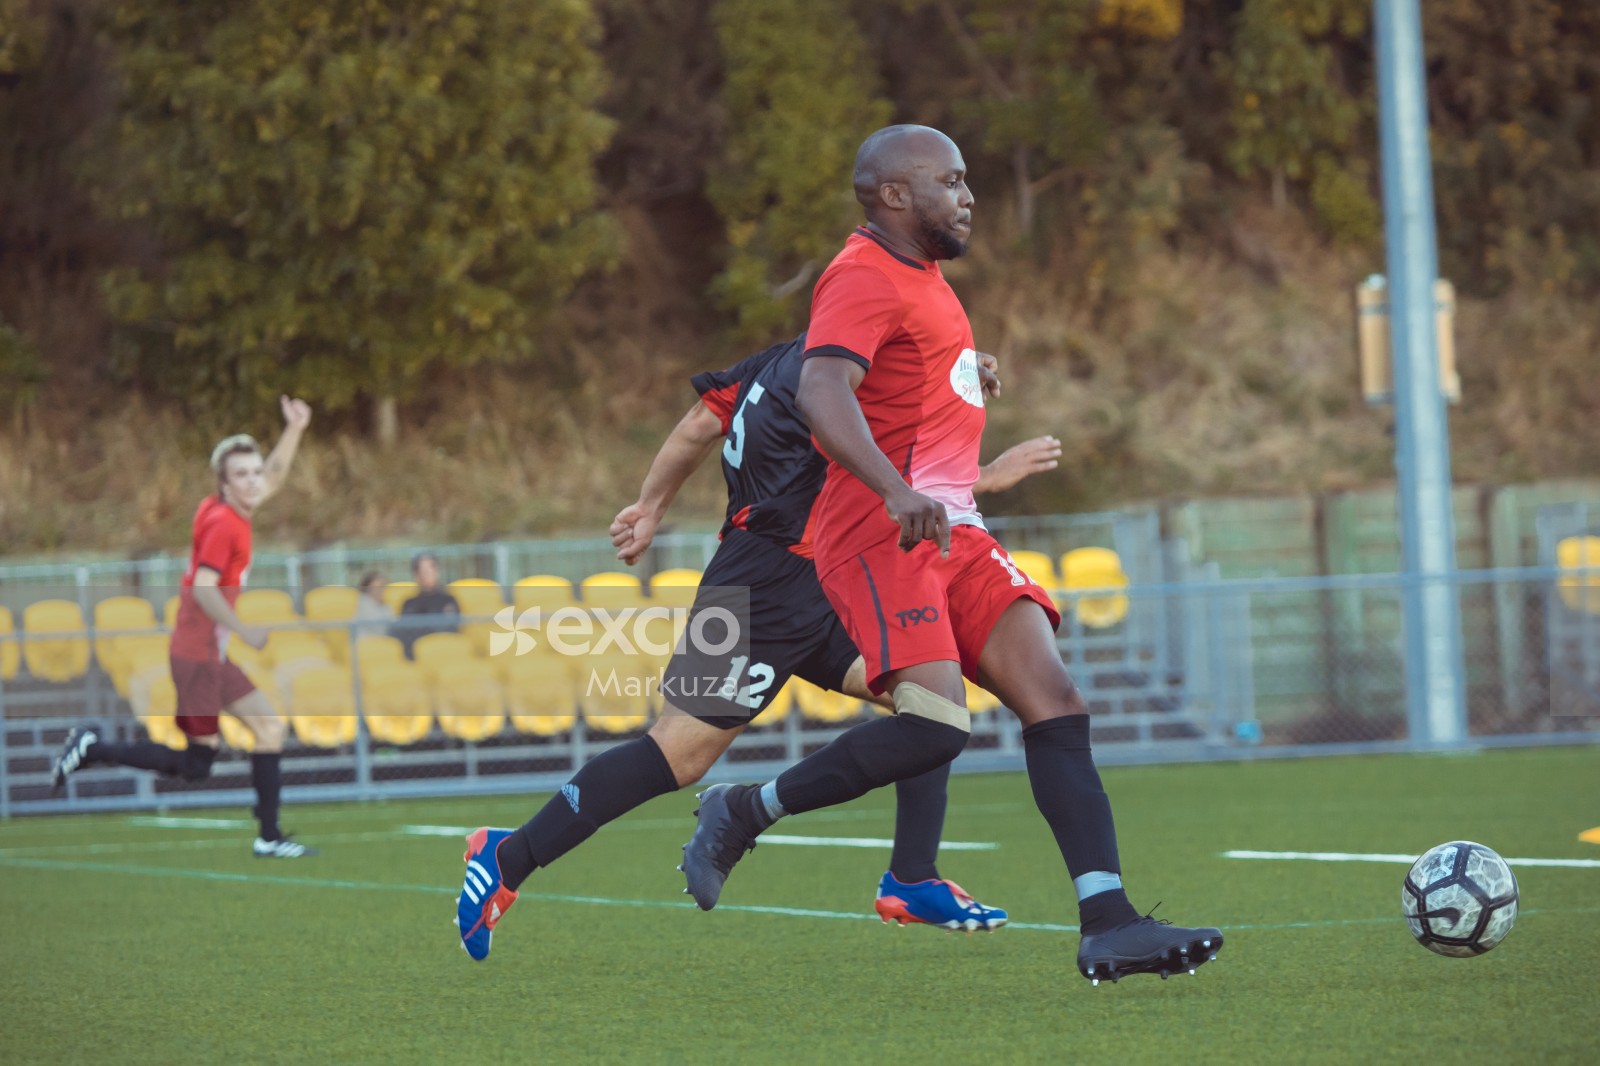 Bald dark skinned player in red shirt playing football - Sports Zone sunday league